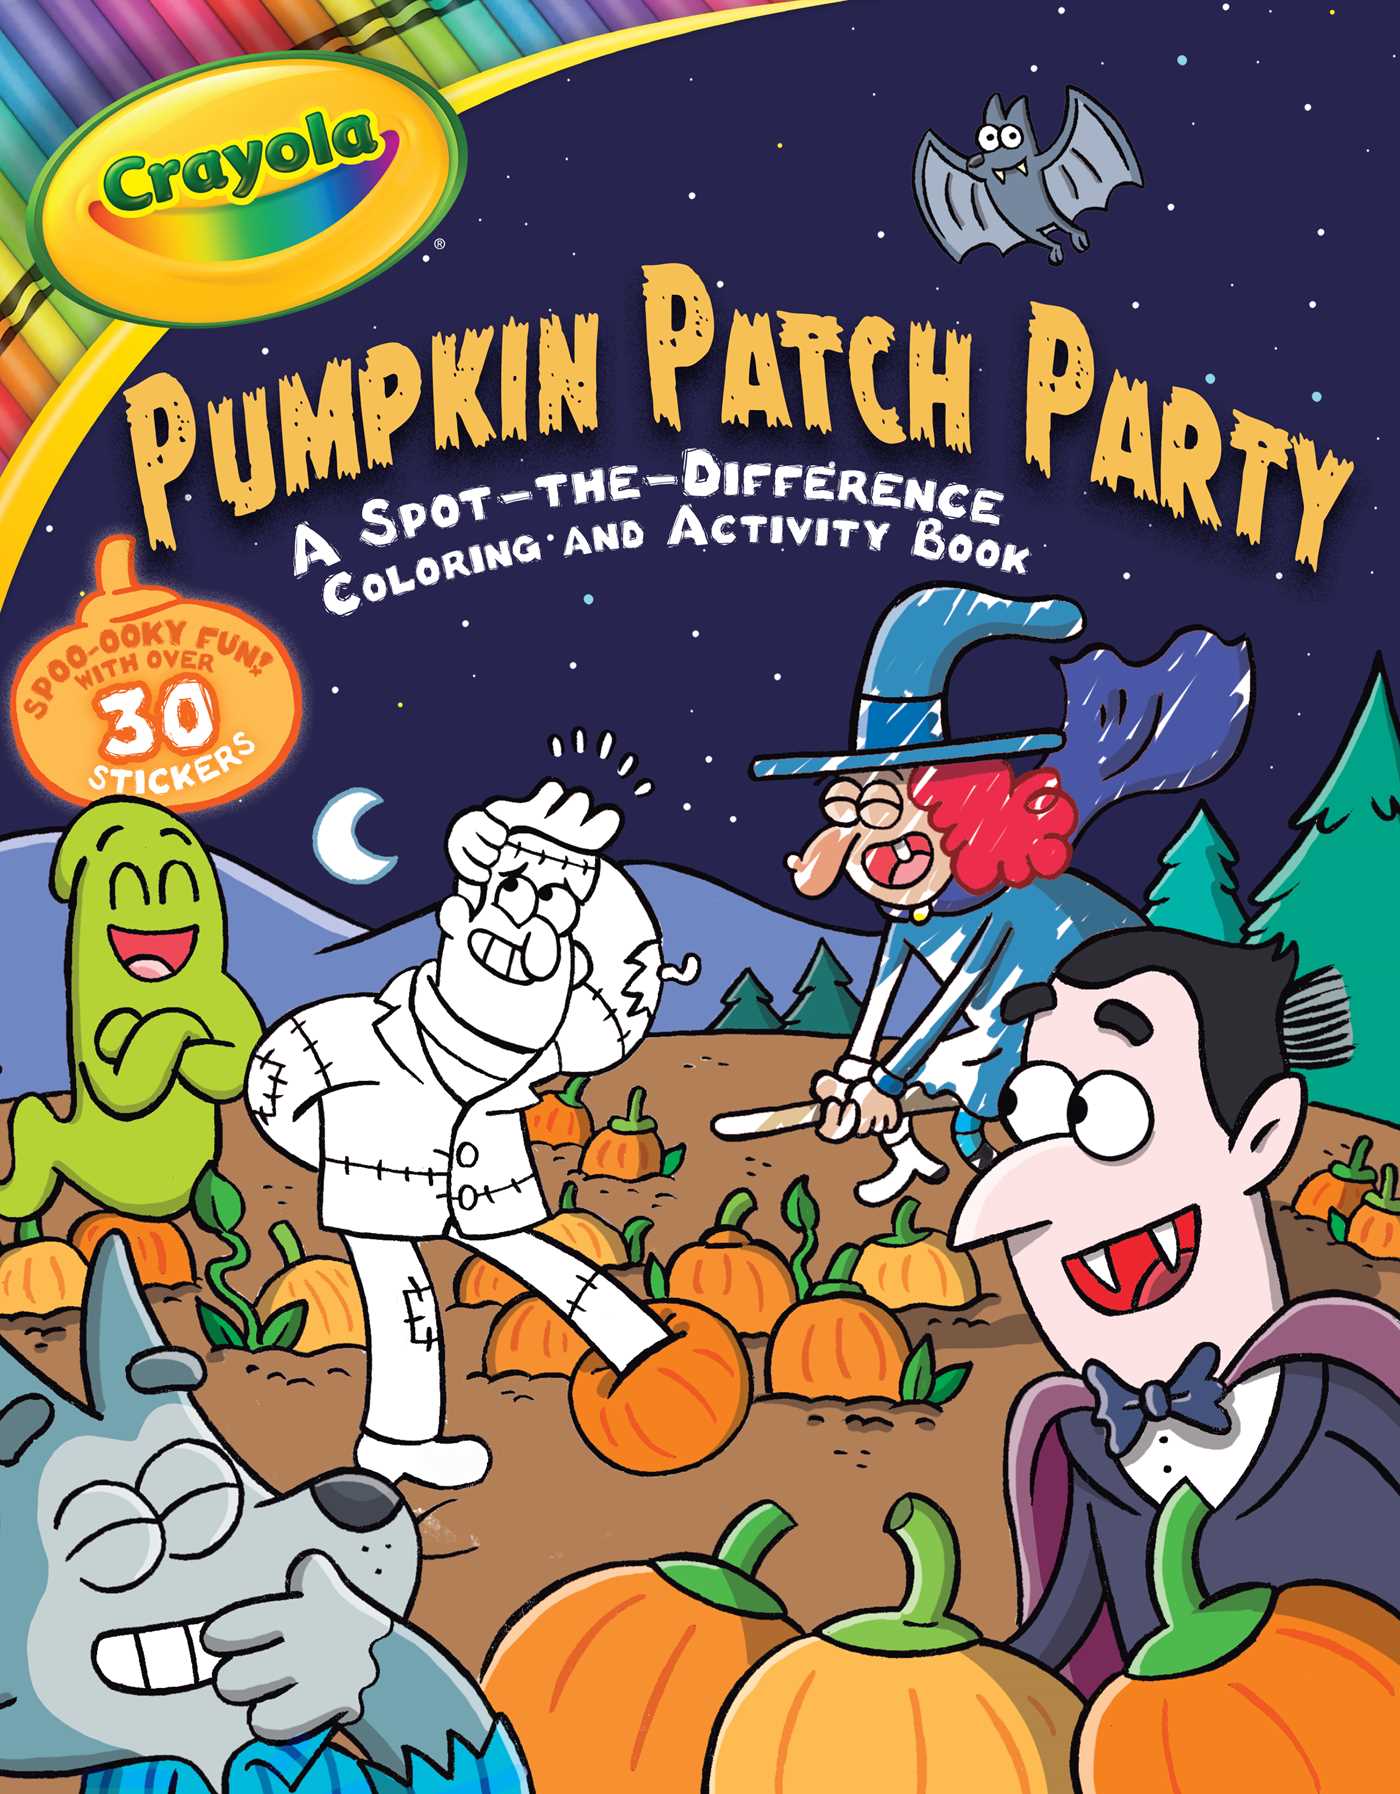 Crayola Pumpkin Patch Party : A Spot-the-Difference Coloring and Activity Book